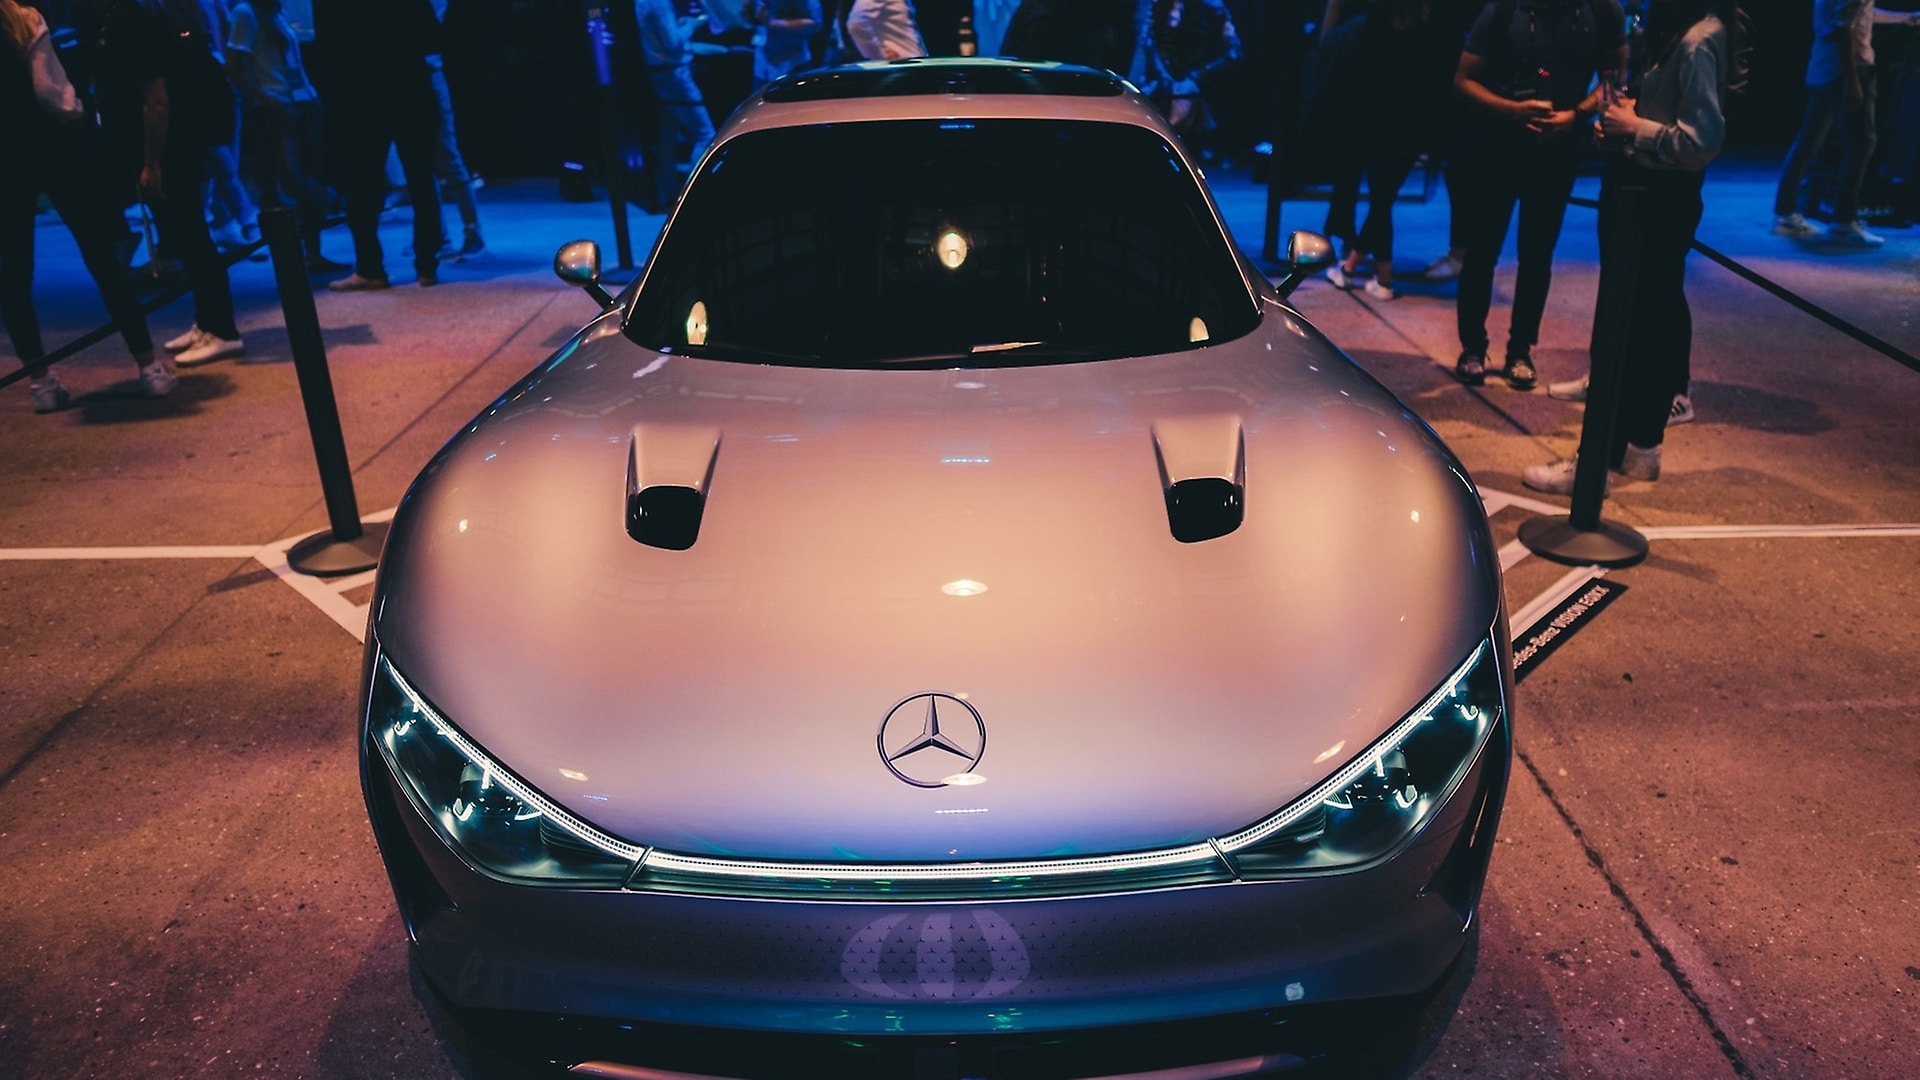 The Mercedes-Benz VISION EQXX at the STARTUP AUTOBAHN EXPO Day in Stuttgart.